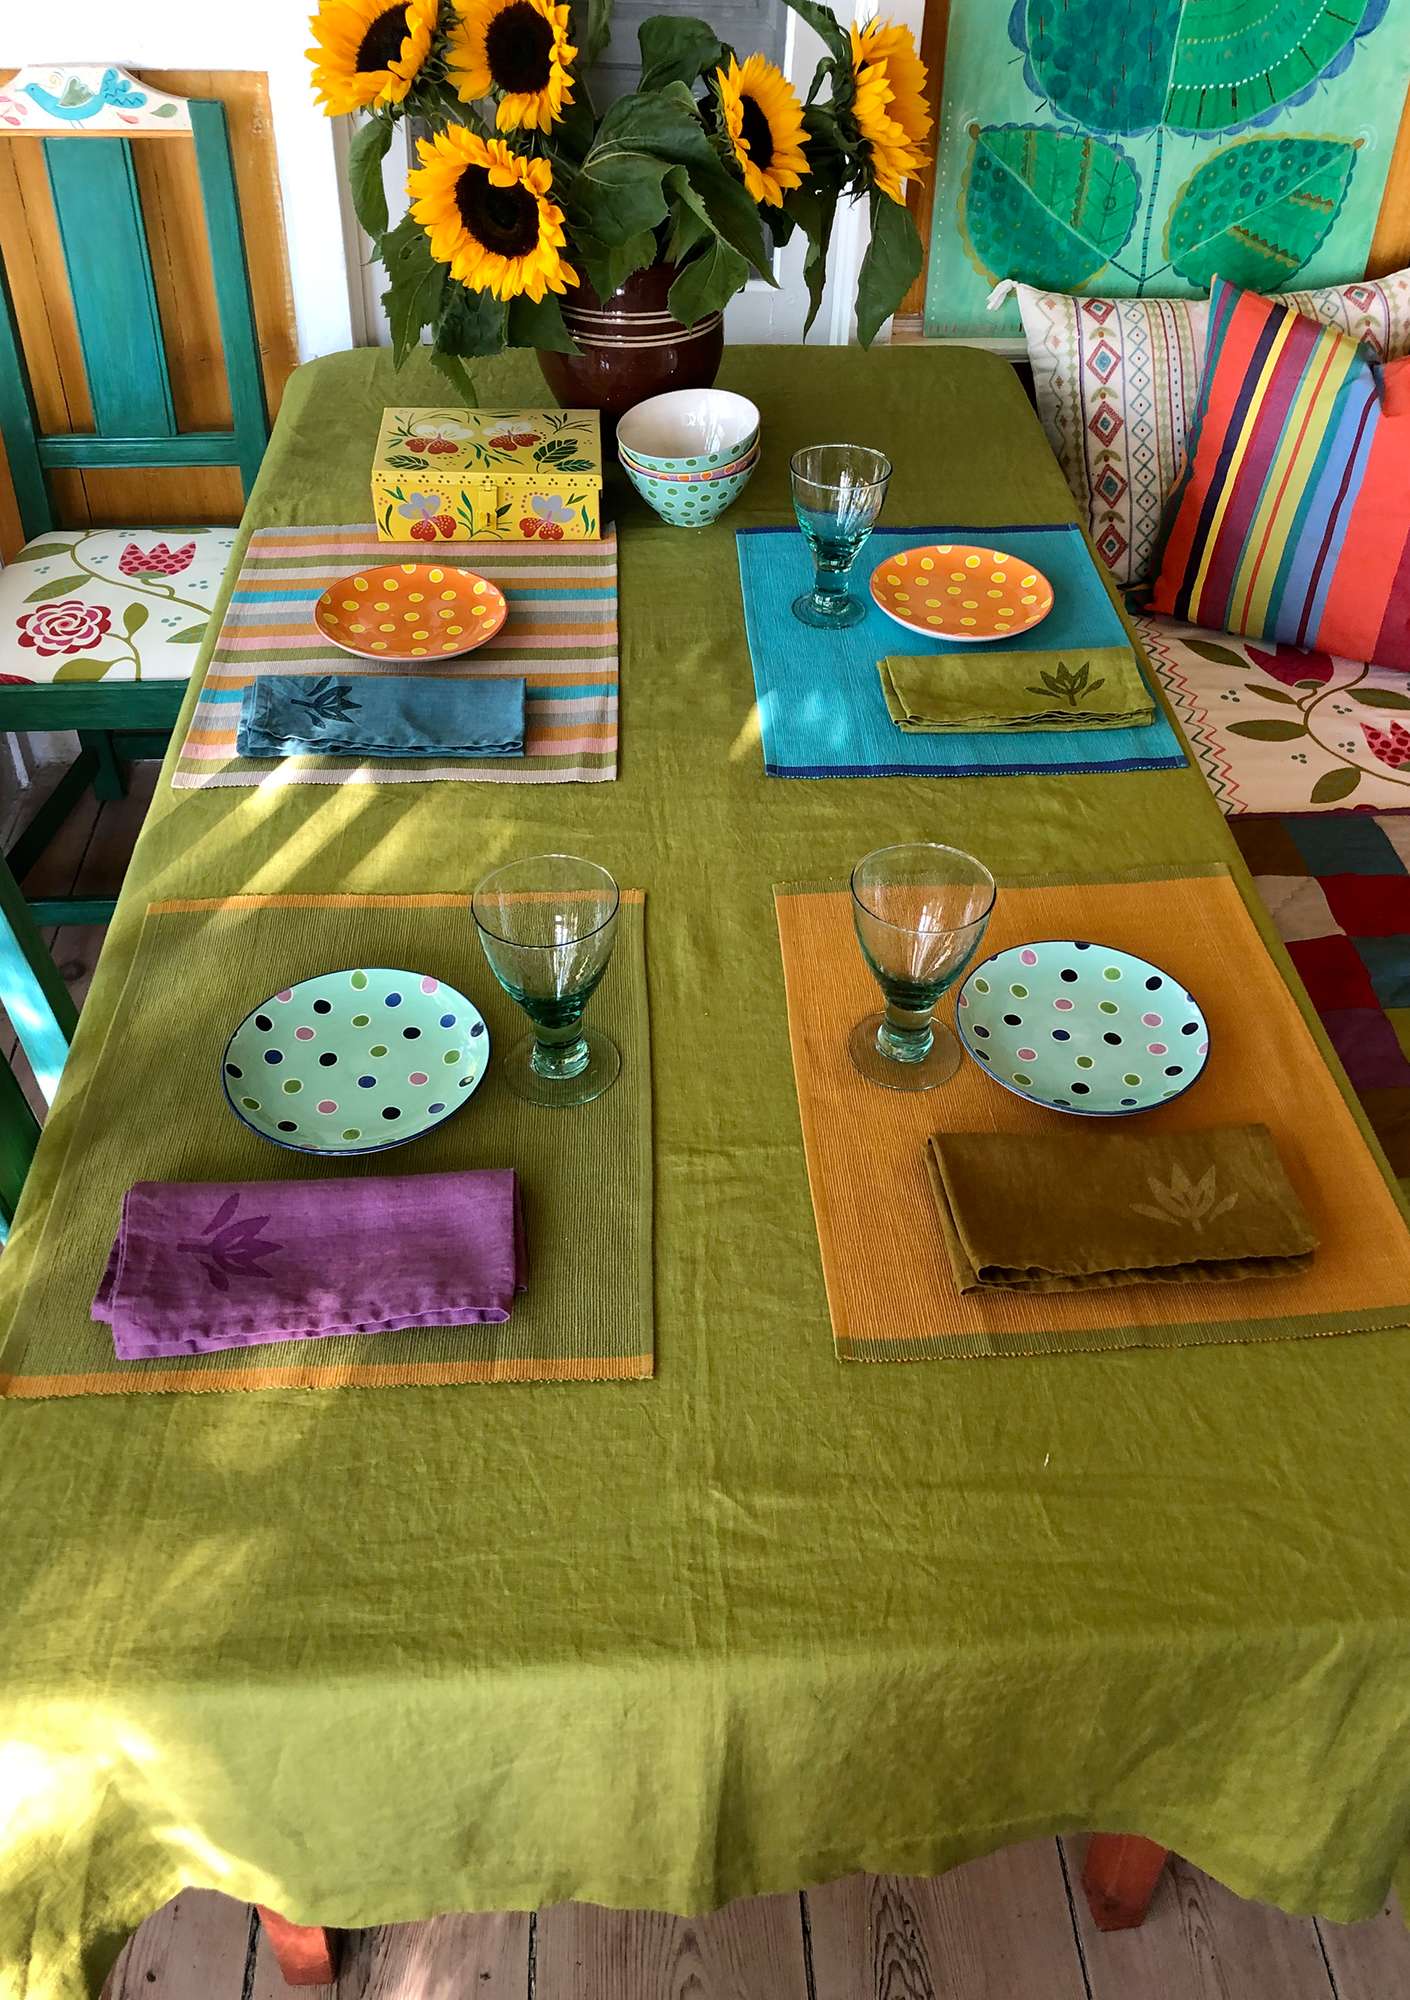 Washed linen tablecloth avocado